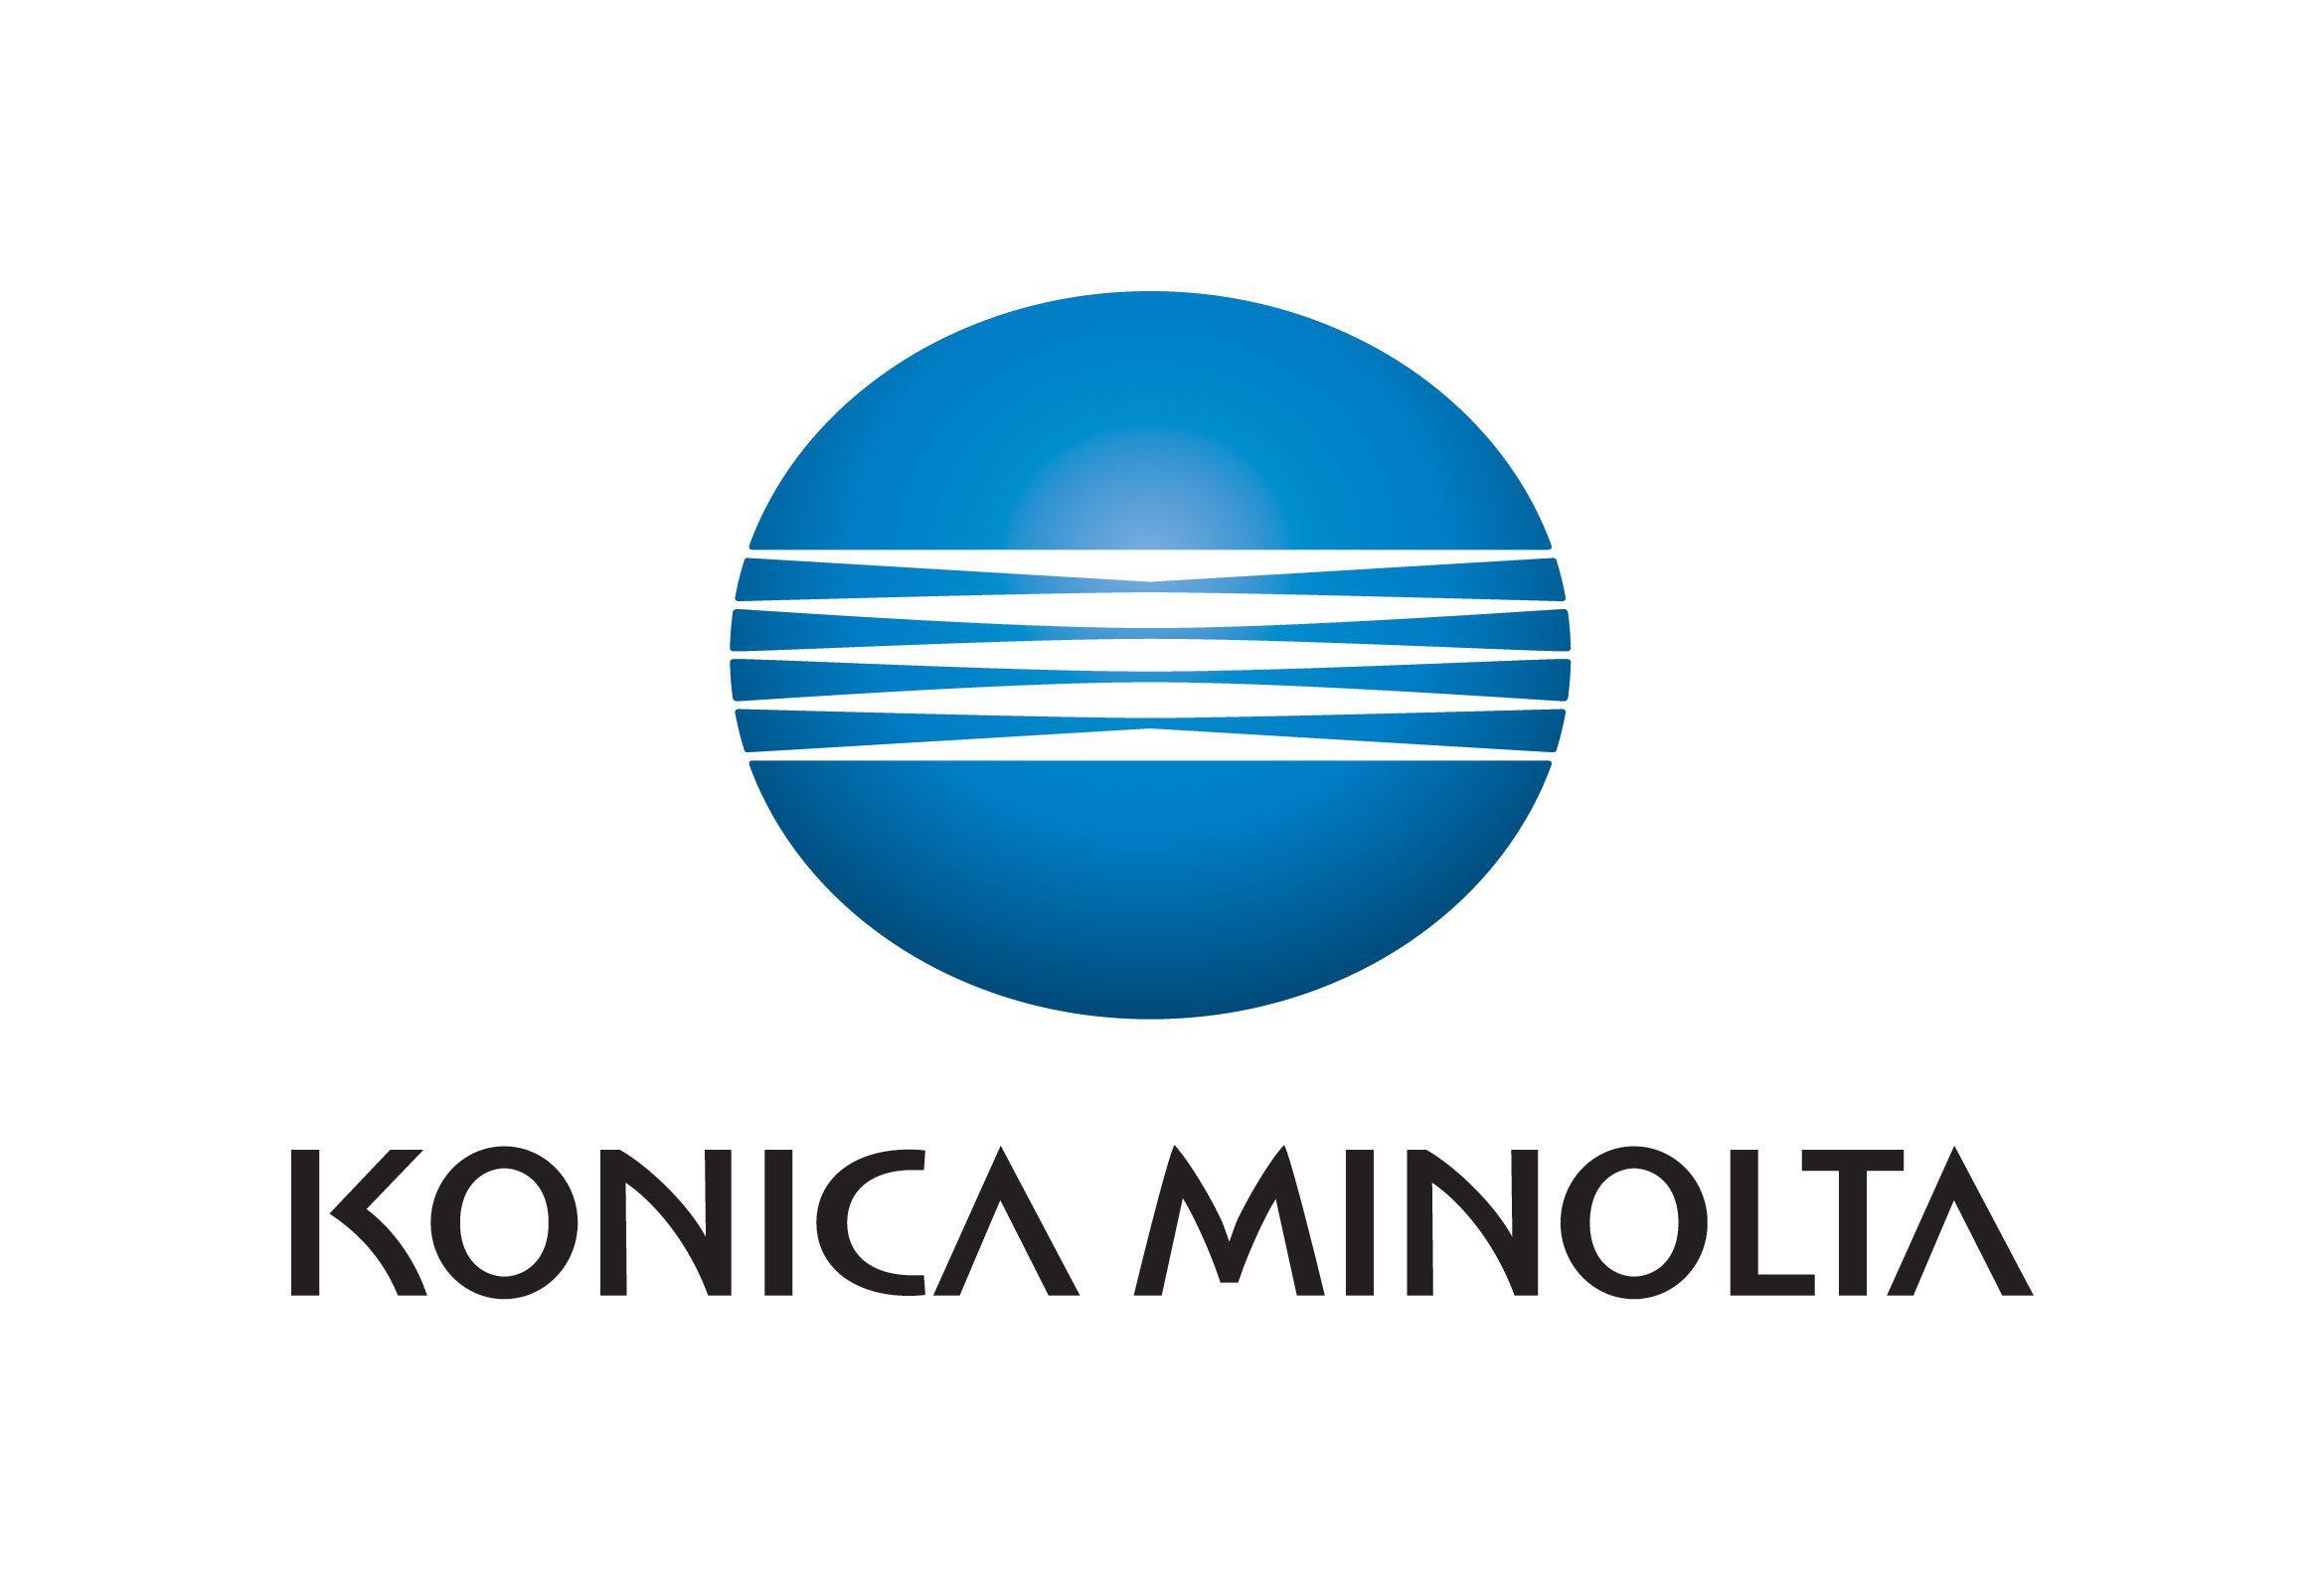 Blue Circle with White Lines Logo - 3d_positive_konica_minolta_vertical_logo - Printing Industries Alliance